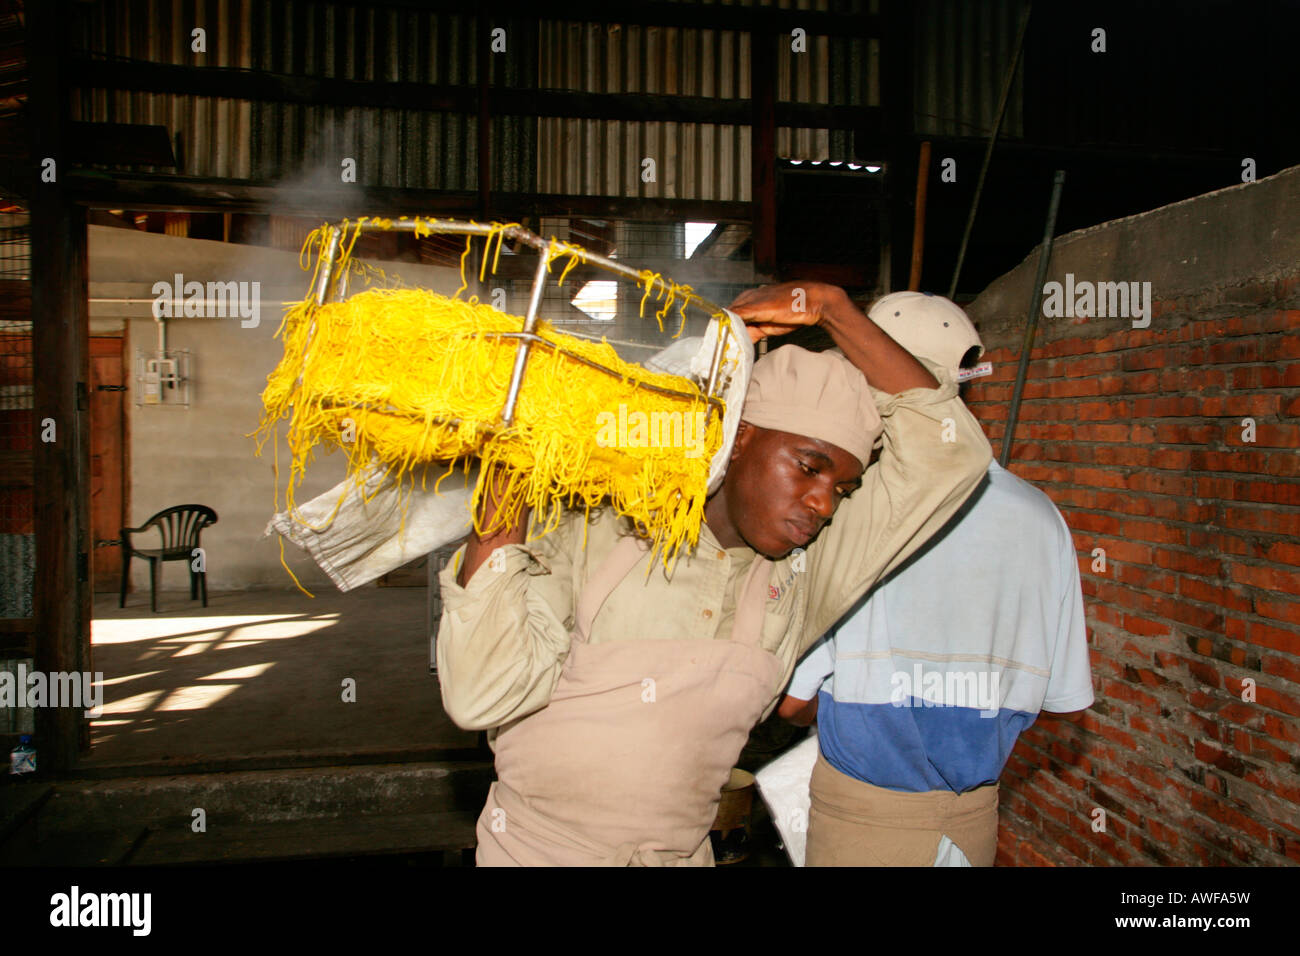 Workers engaged in the production of pasta at pasta factory, Demerara Province, Guyana, South America Stock Photo